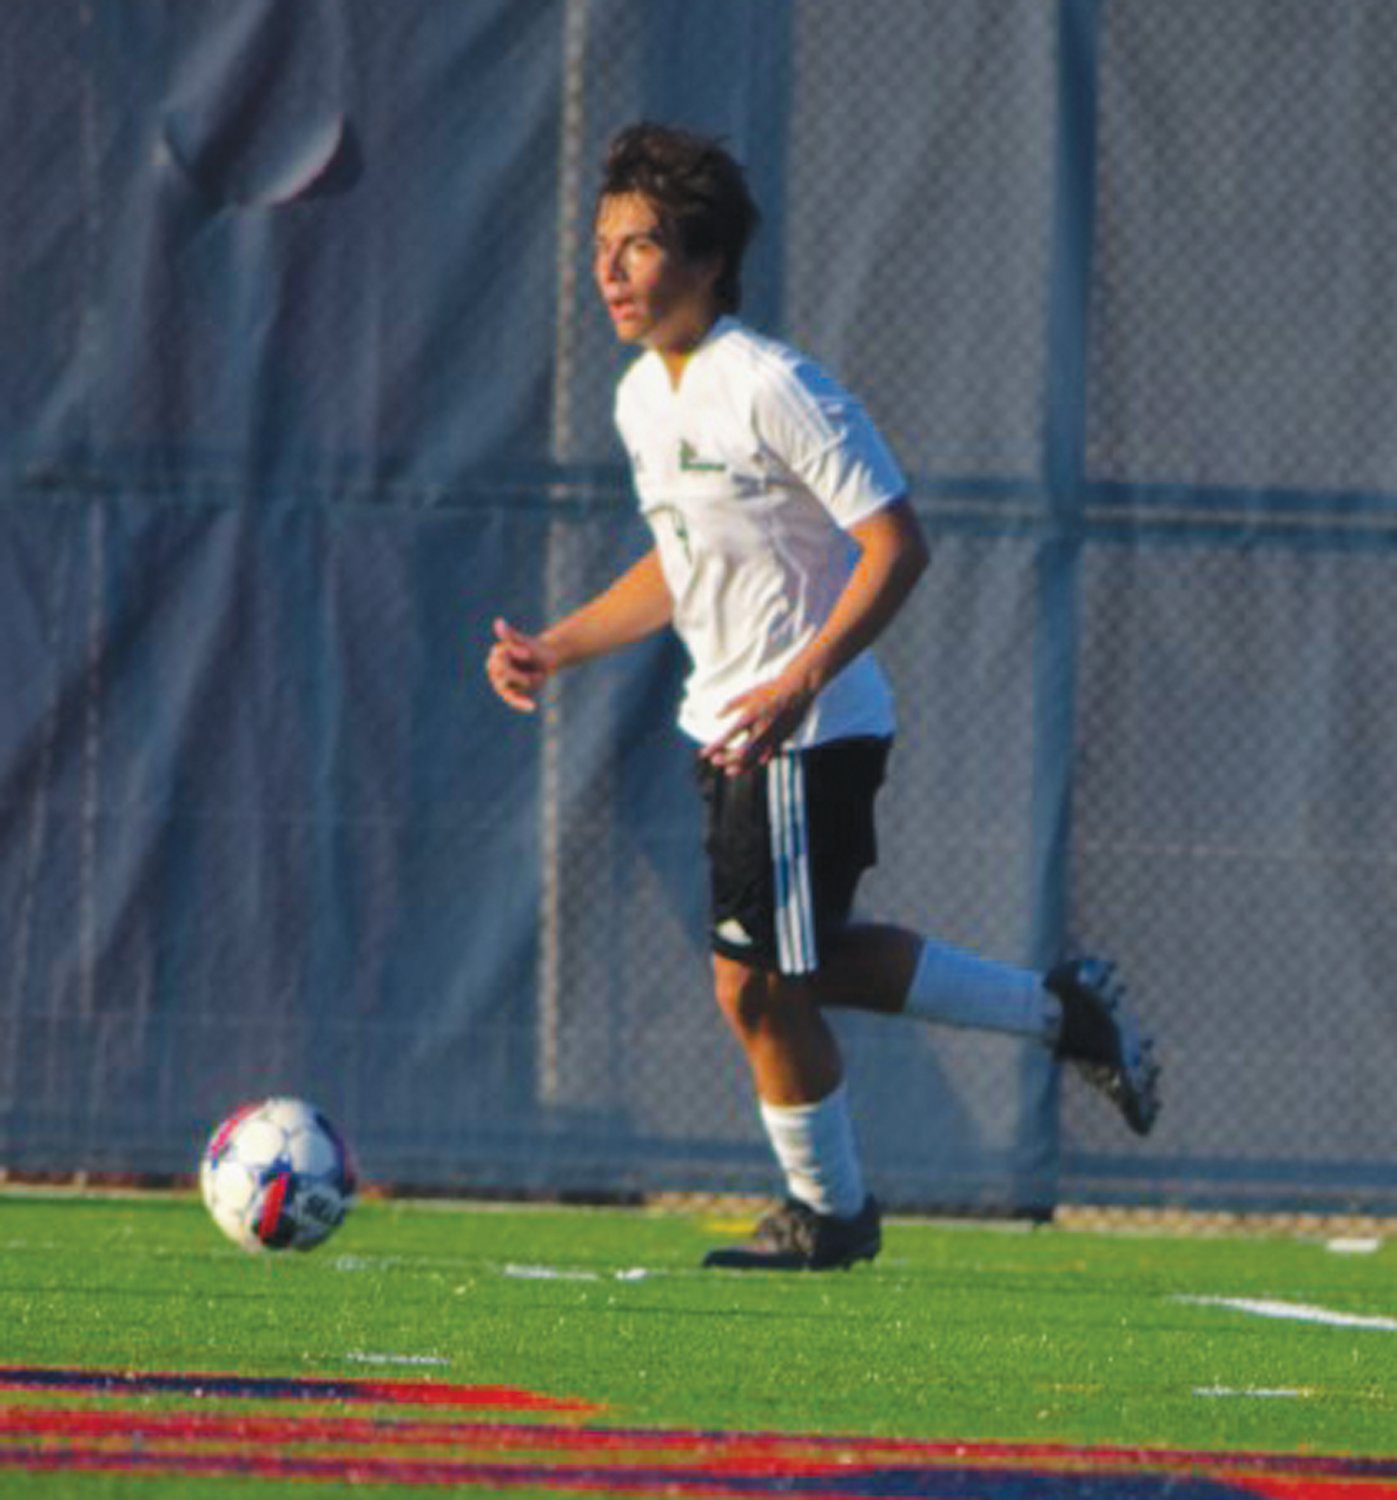 UP THE FIELD: CCRI’s Christian Wilson dribbles the ball.